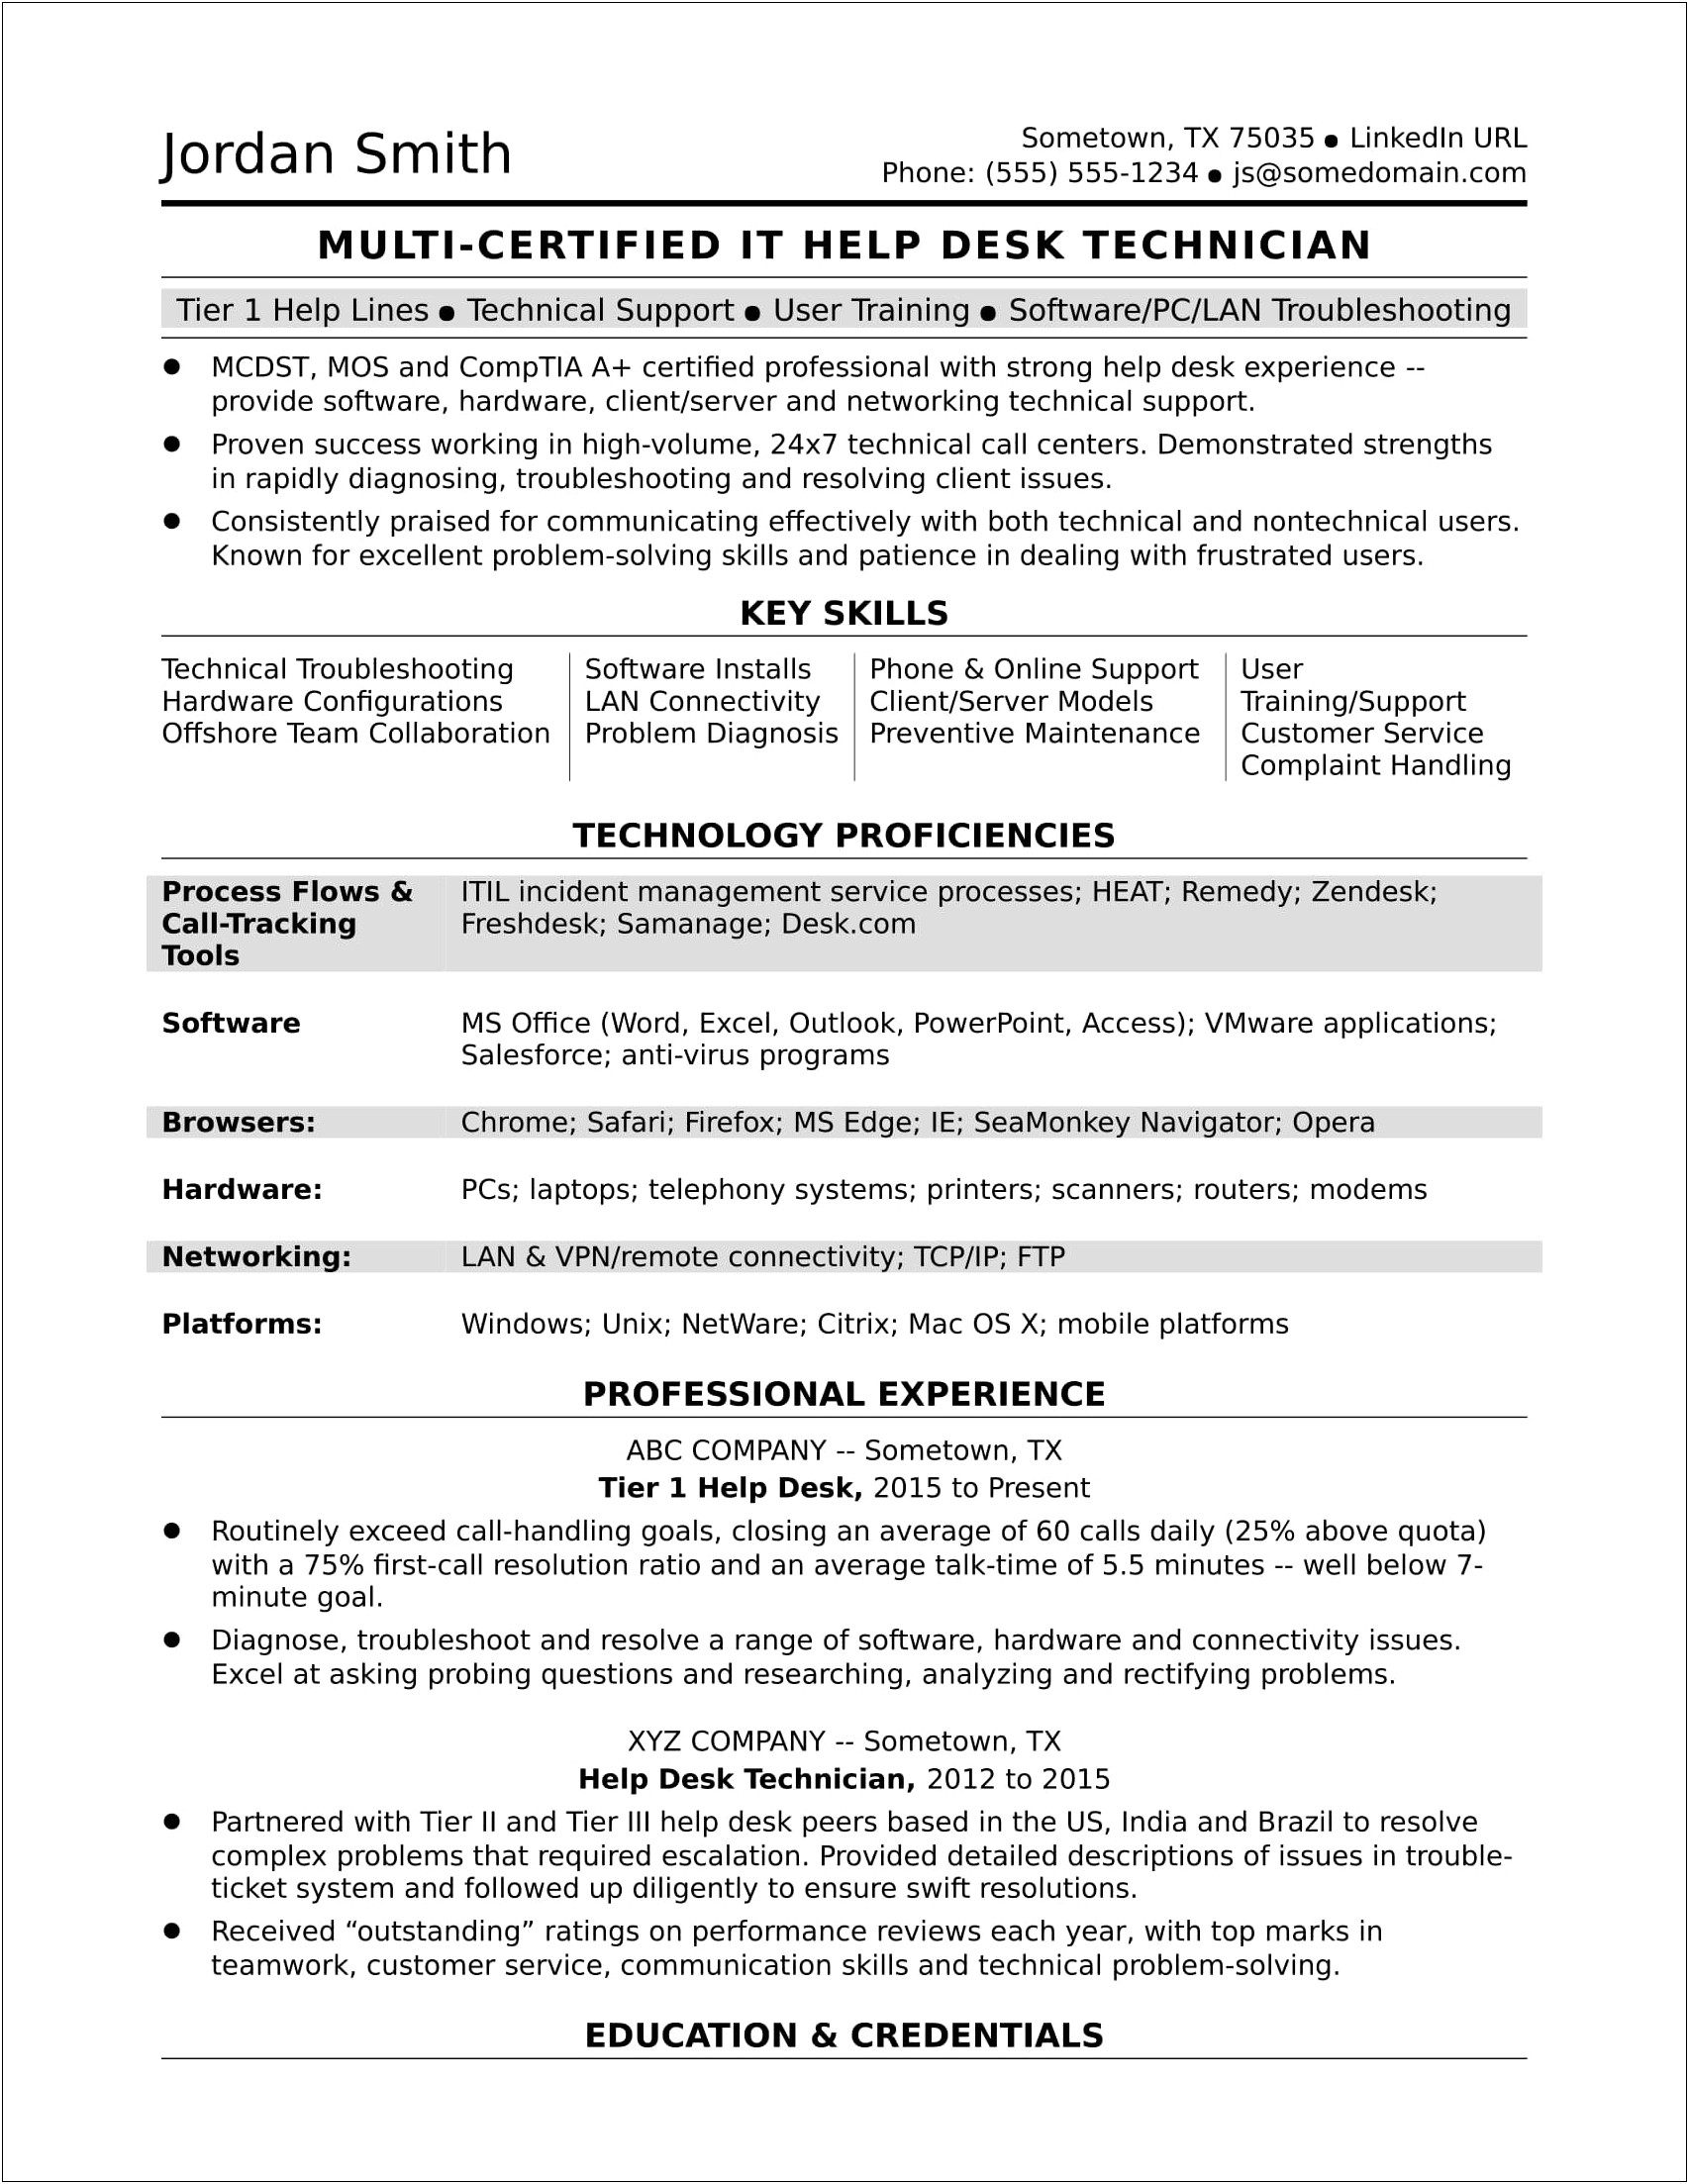 Computer Skills In Microsoft Office On Resume